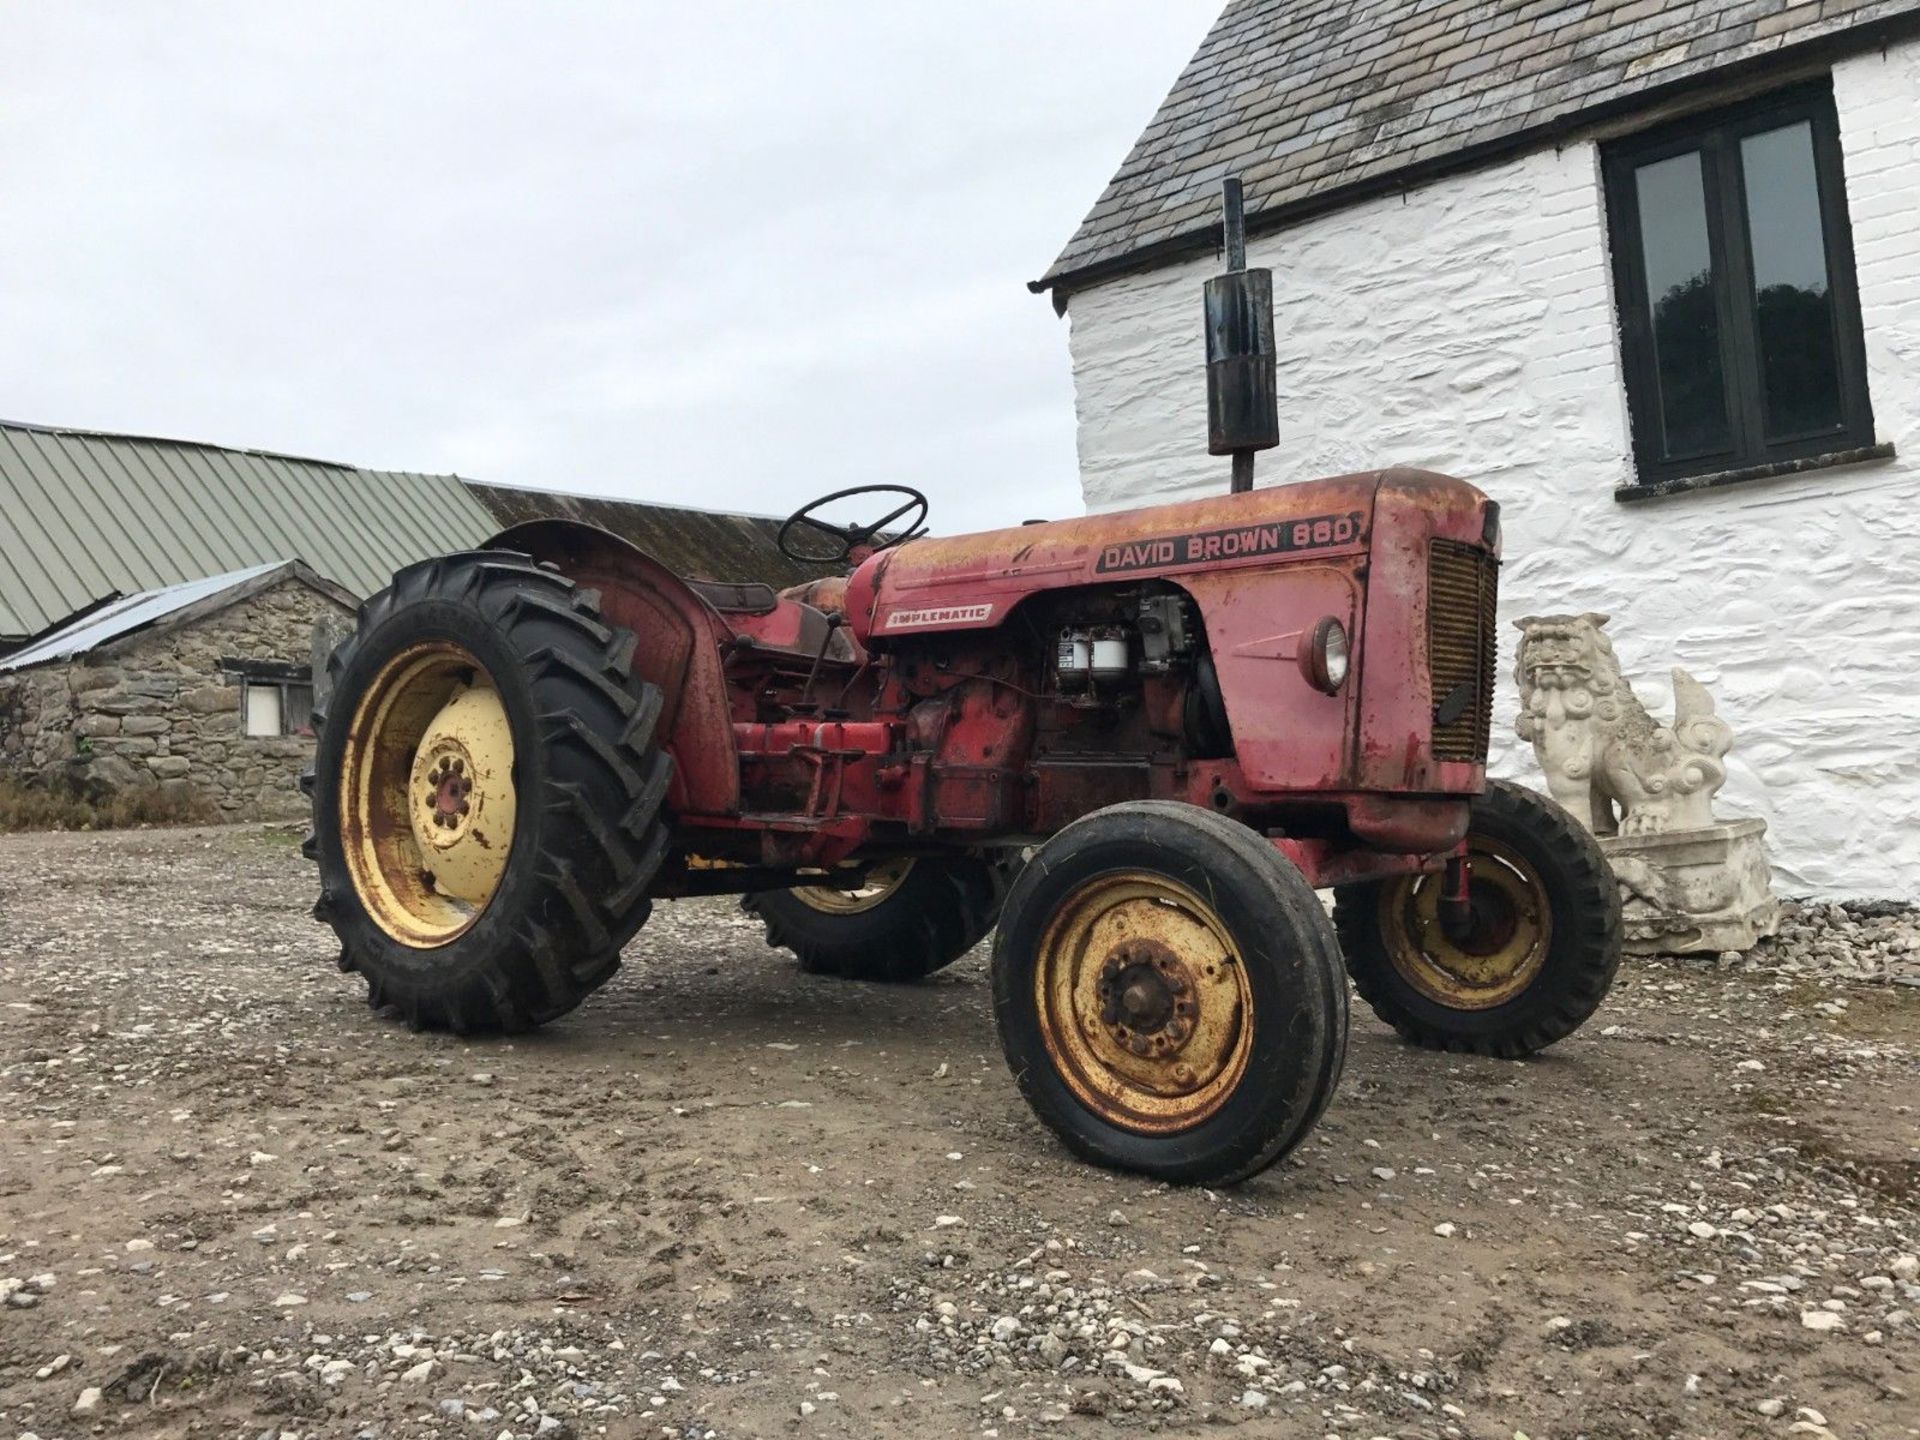 David Brown 880 Tractor 2wd 3 Cylinder